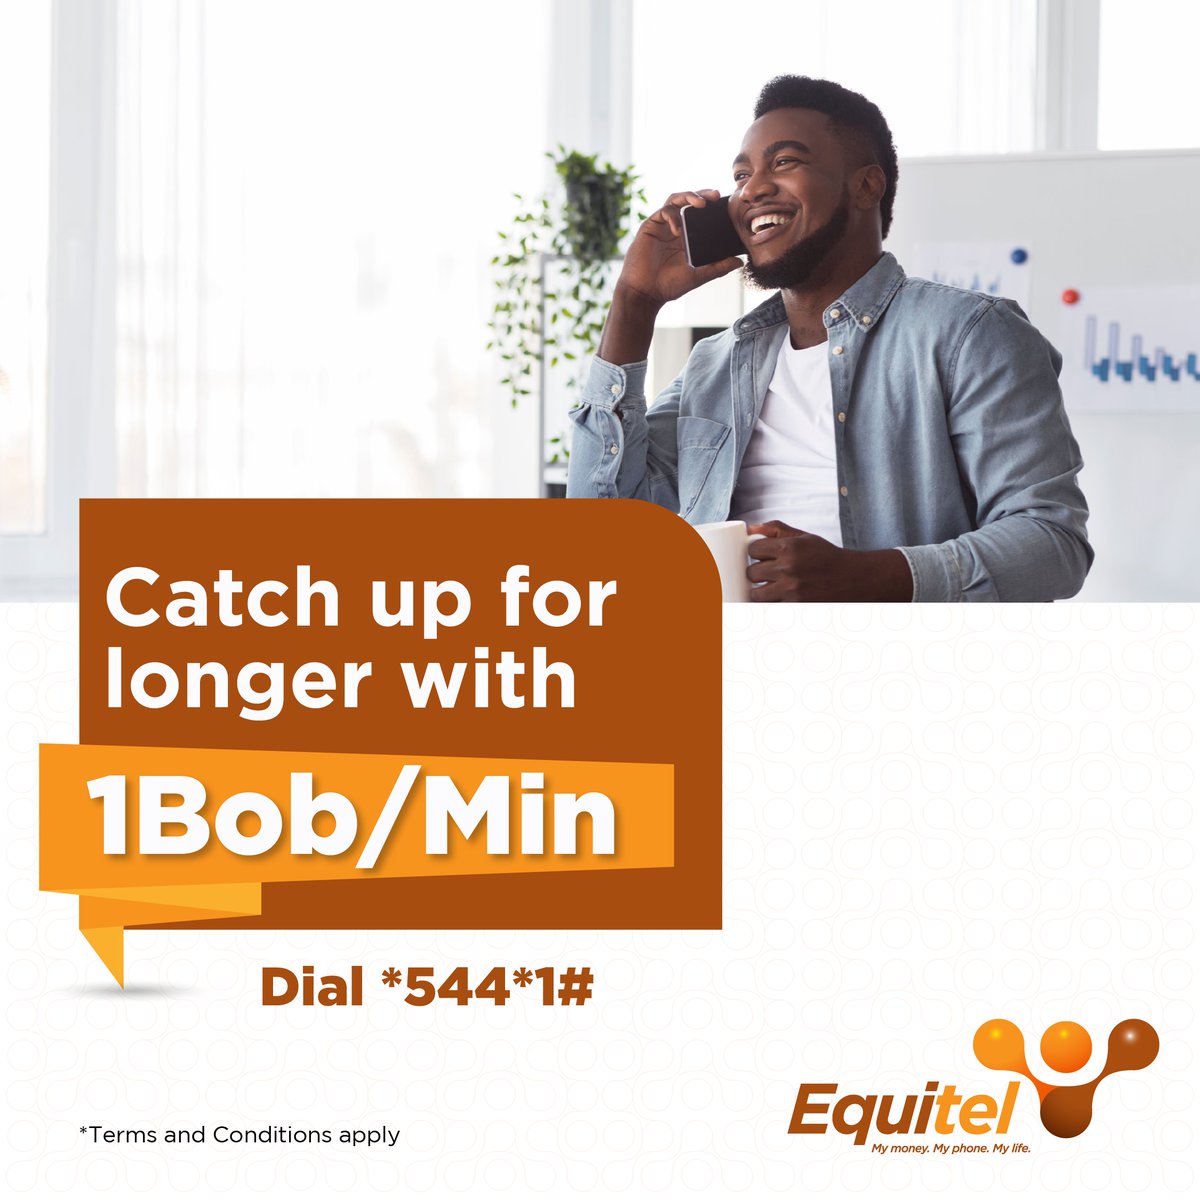 Have you stayed for long without catching up with a loved one? Simply dial *544*1# and enjoy longer calls across all networks at 1 bob per minute with Ongea bundles. #MalizaStoroNaEquitel